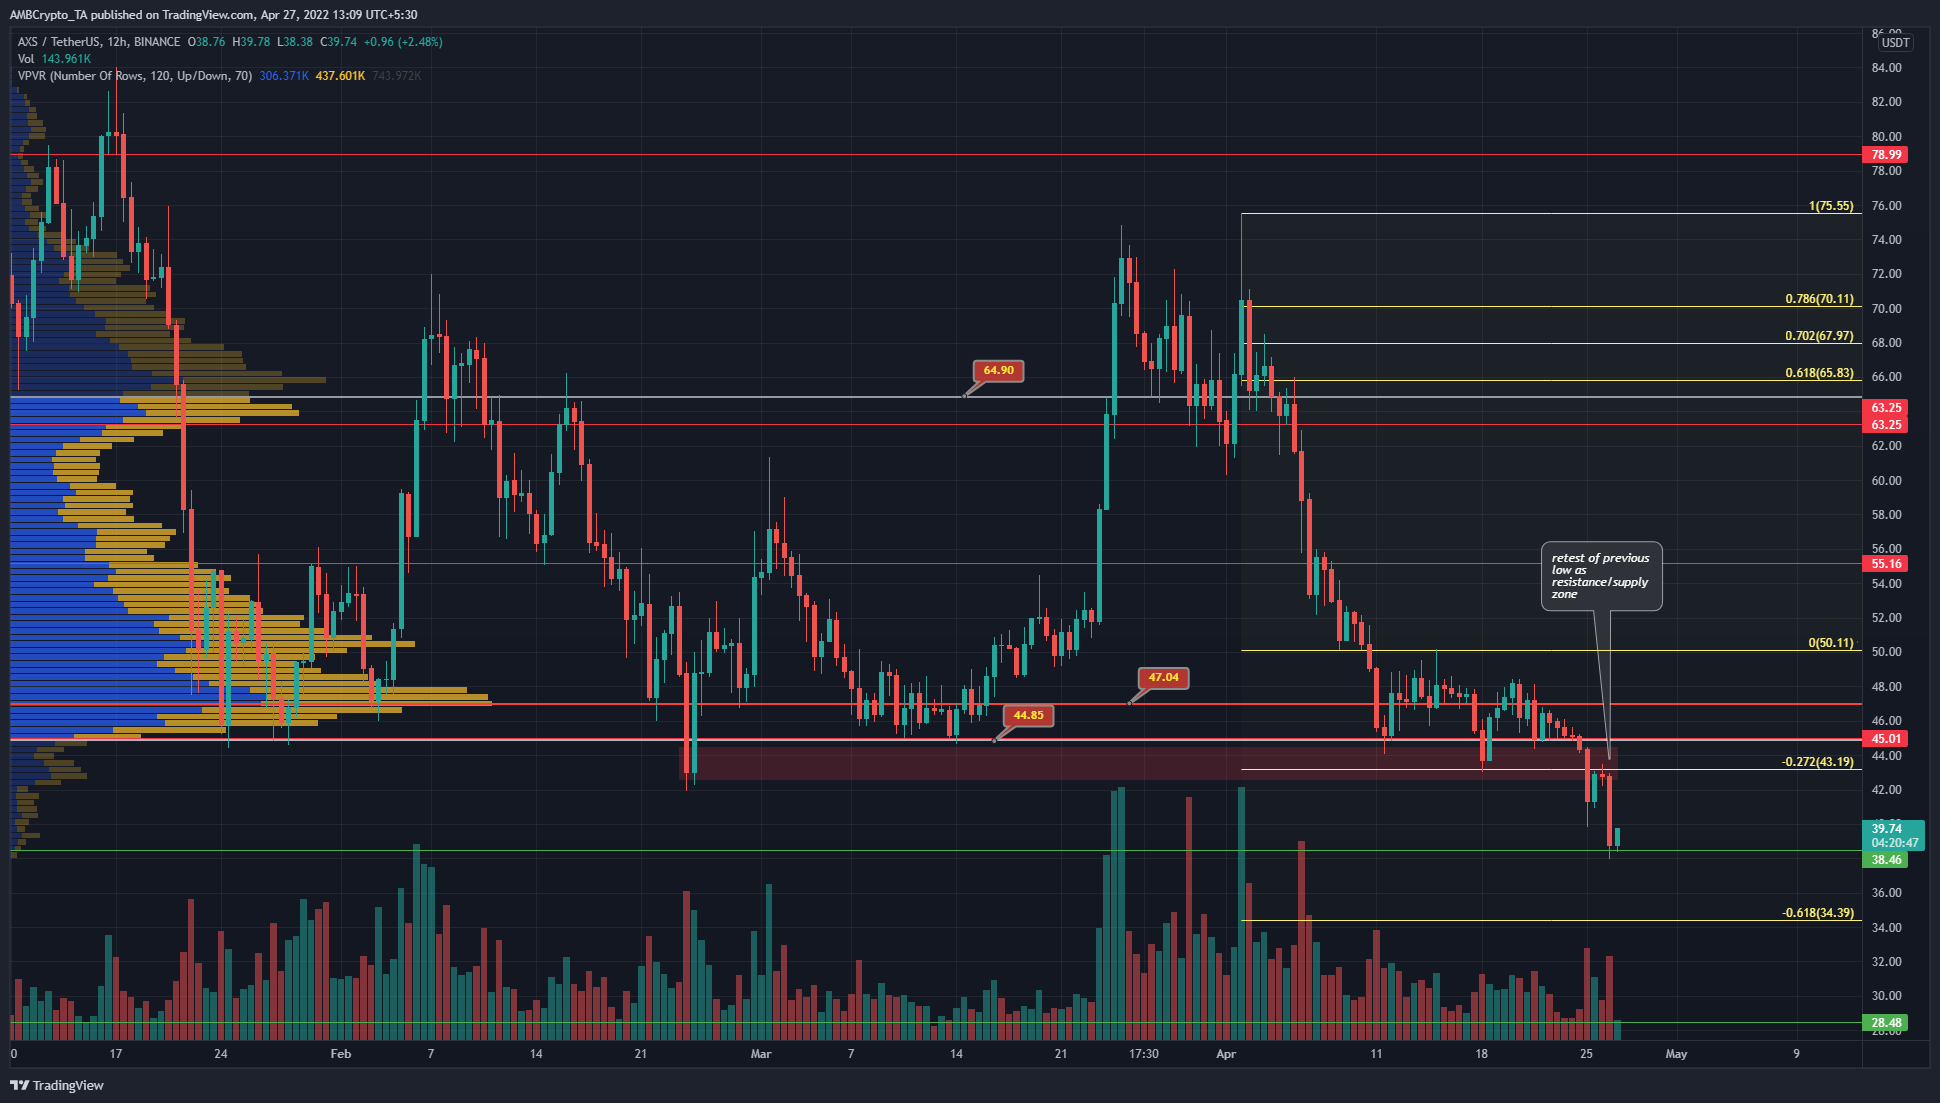 March rally gains fully retraced, where to next for Axie Infinity?